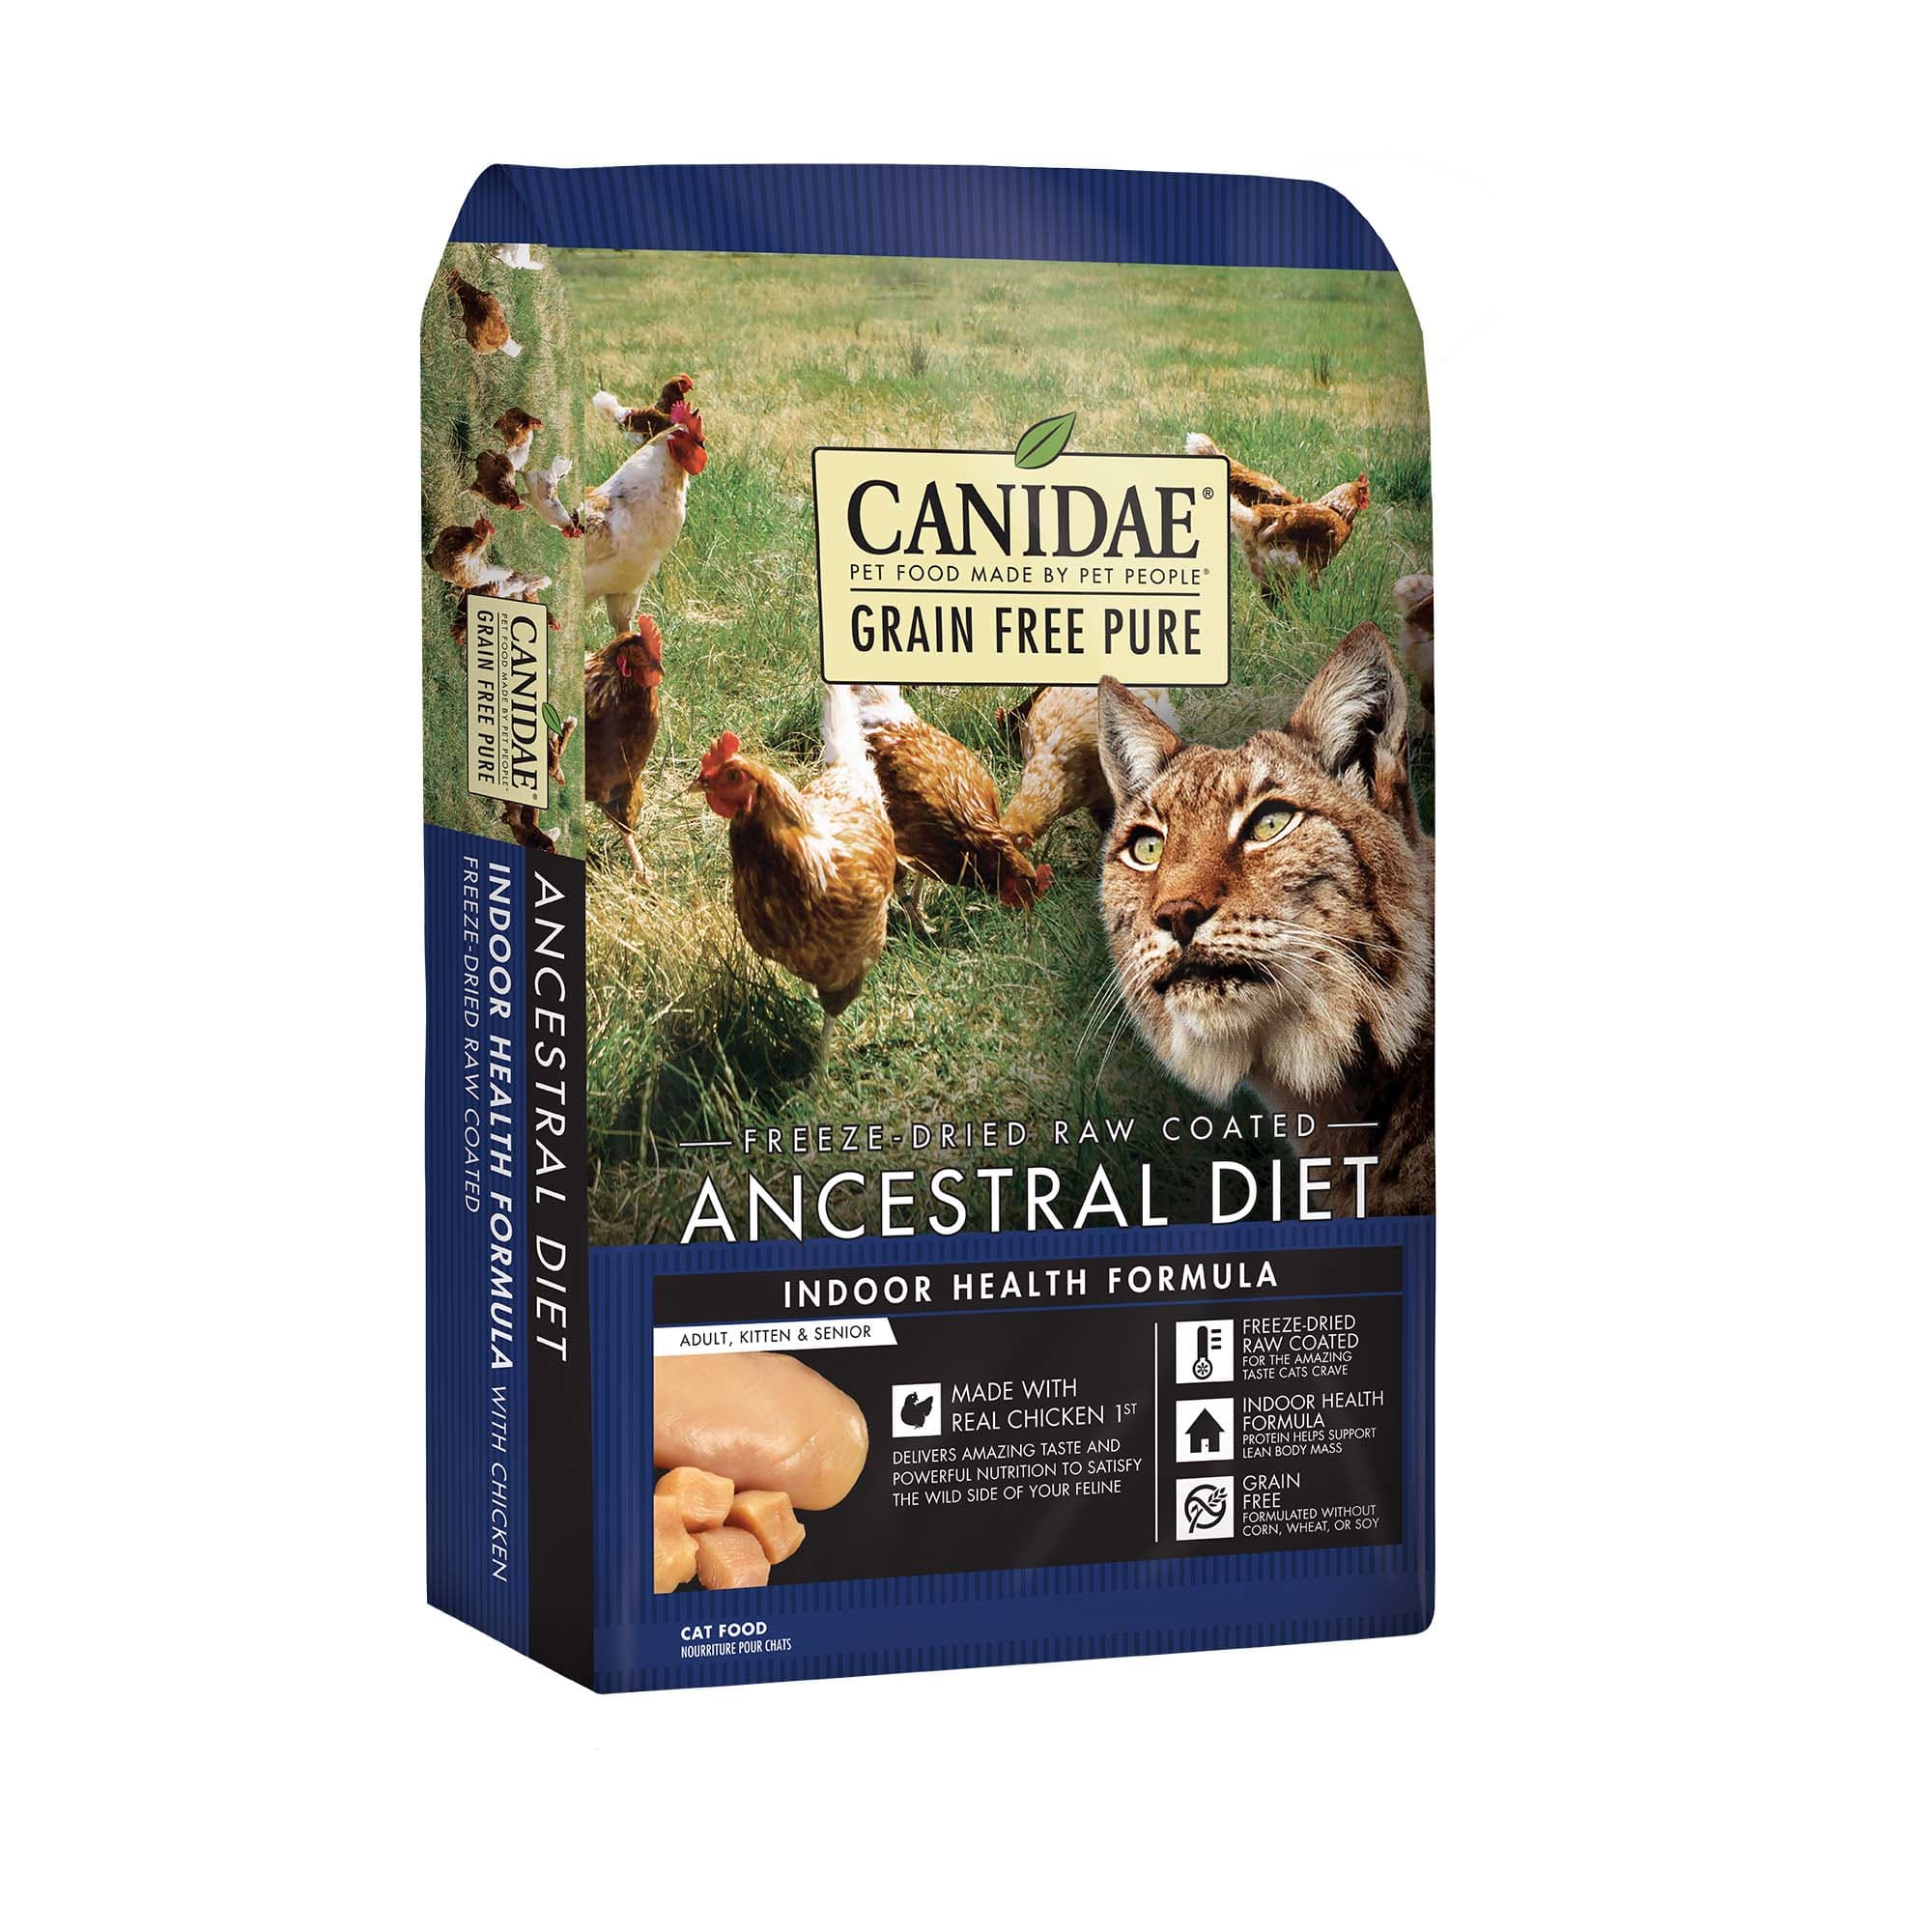 CANIDAE Grain Free PURE Ancestral Diet Chicken Dry Cat Food eBay